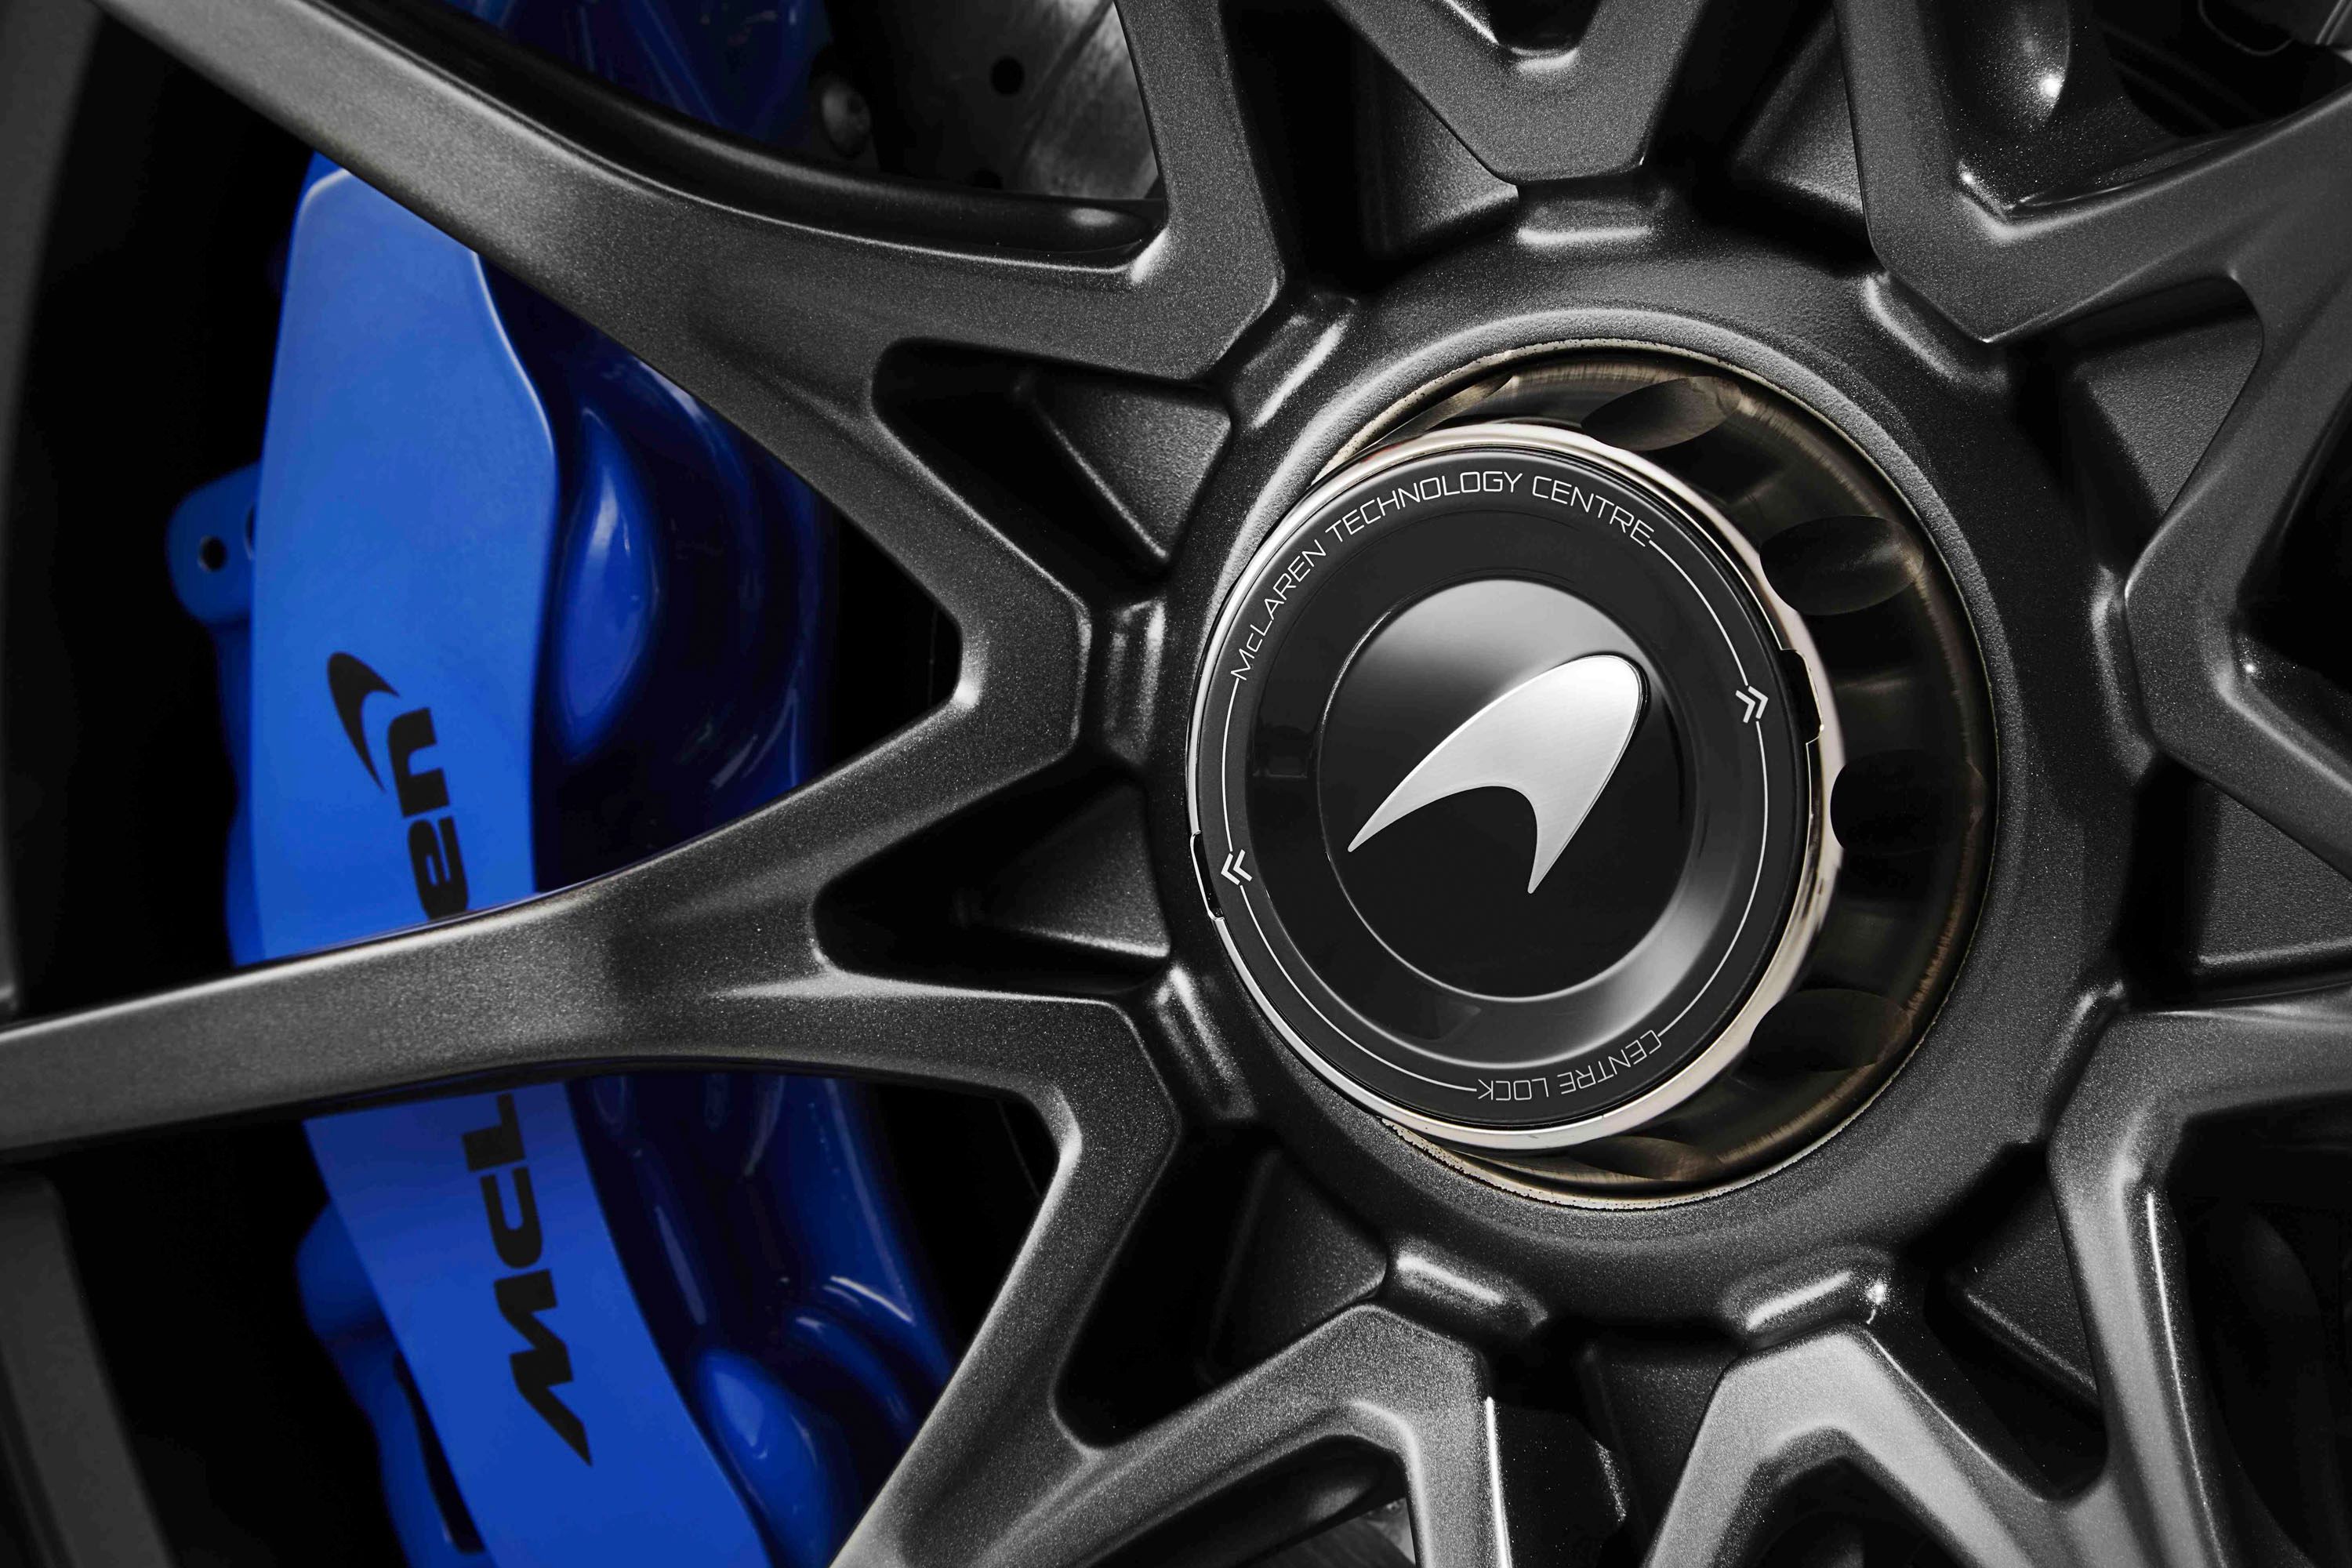 Carbon ceramic brakes and ultralightweight alloy wheels